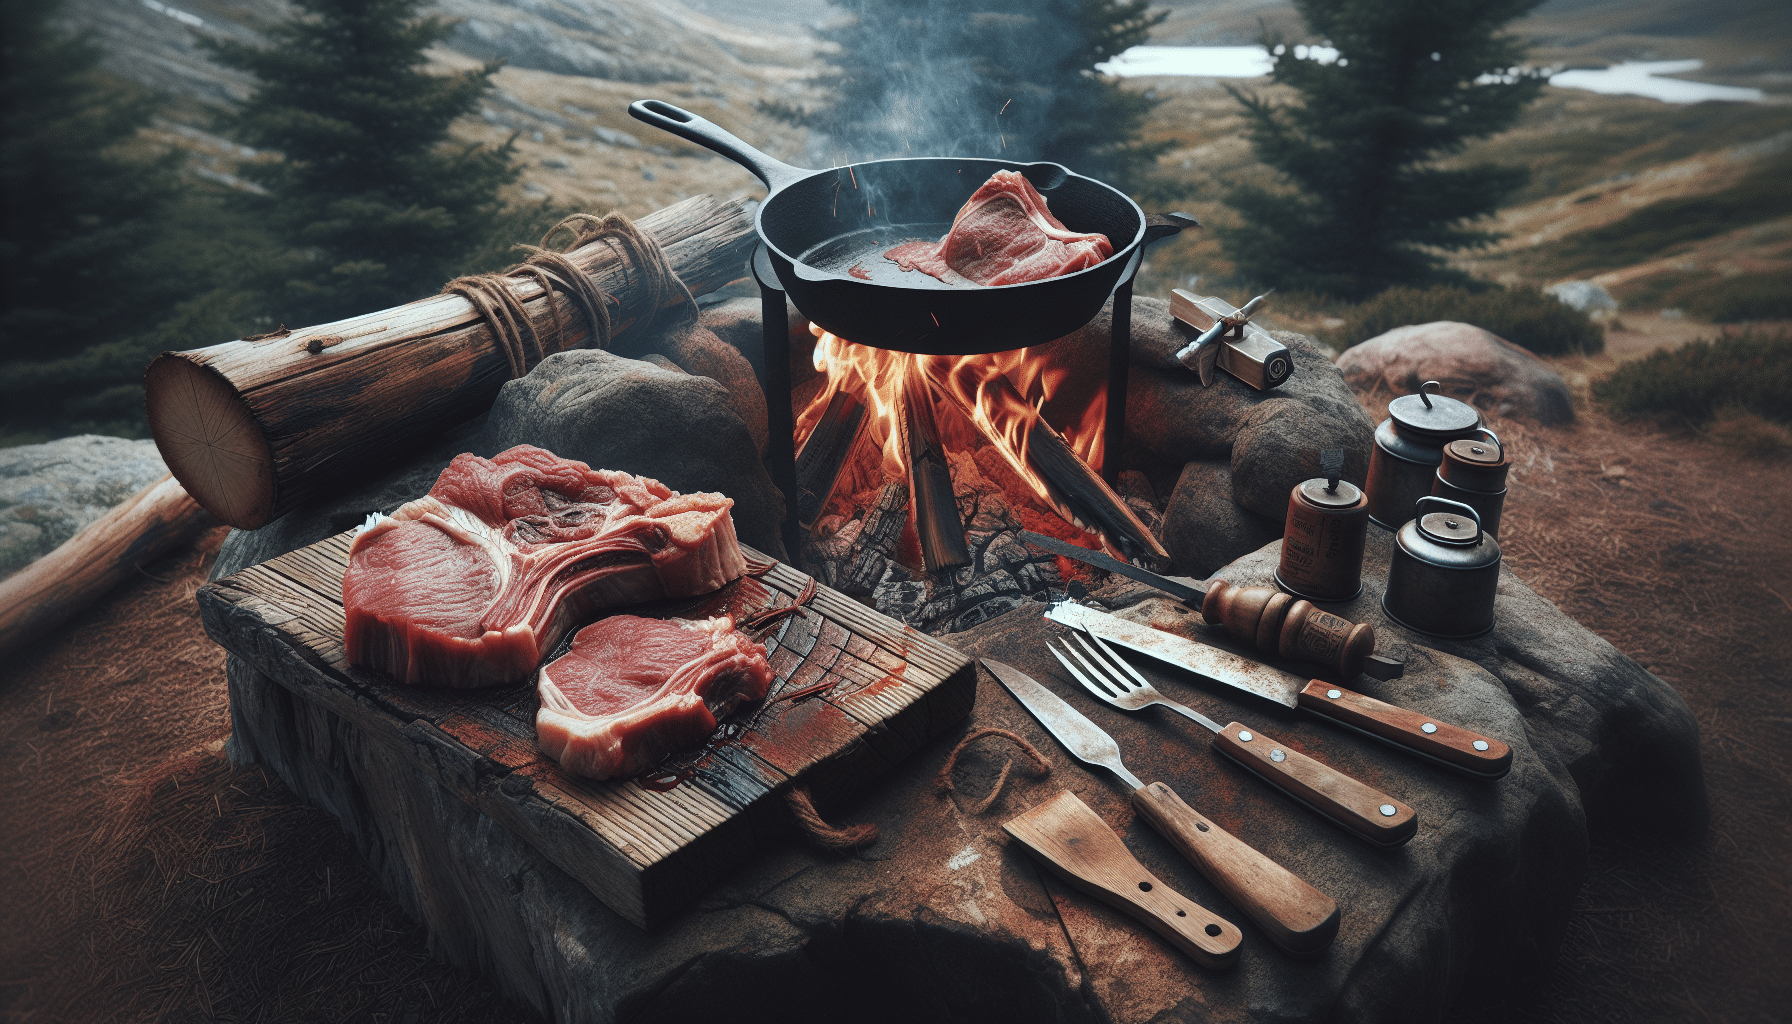 An image showcasing an outdoor campfire scene with a rustic grilling setup. Raw slabs of meat, implied to be bear, are revealed on a rough-hewn wooden board, awaiting preparation. To the side, there's a cast-iron pan over a crackling fire, ready to be used for cooking. Nearby, various unmarked culinary tools can be seen - a simple steel knife, a wooden fork, and a spatula. The surrounding environment is a mix of pine trees and rocks, evoking a wilderness vibe. There are no people, text, or brands present in the scene.